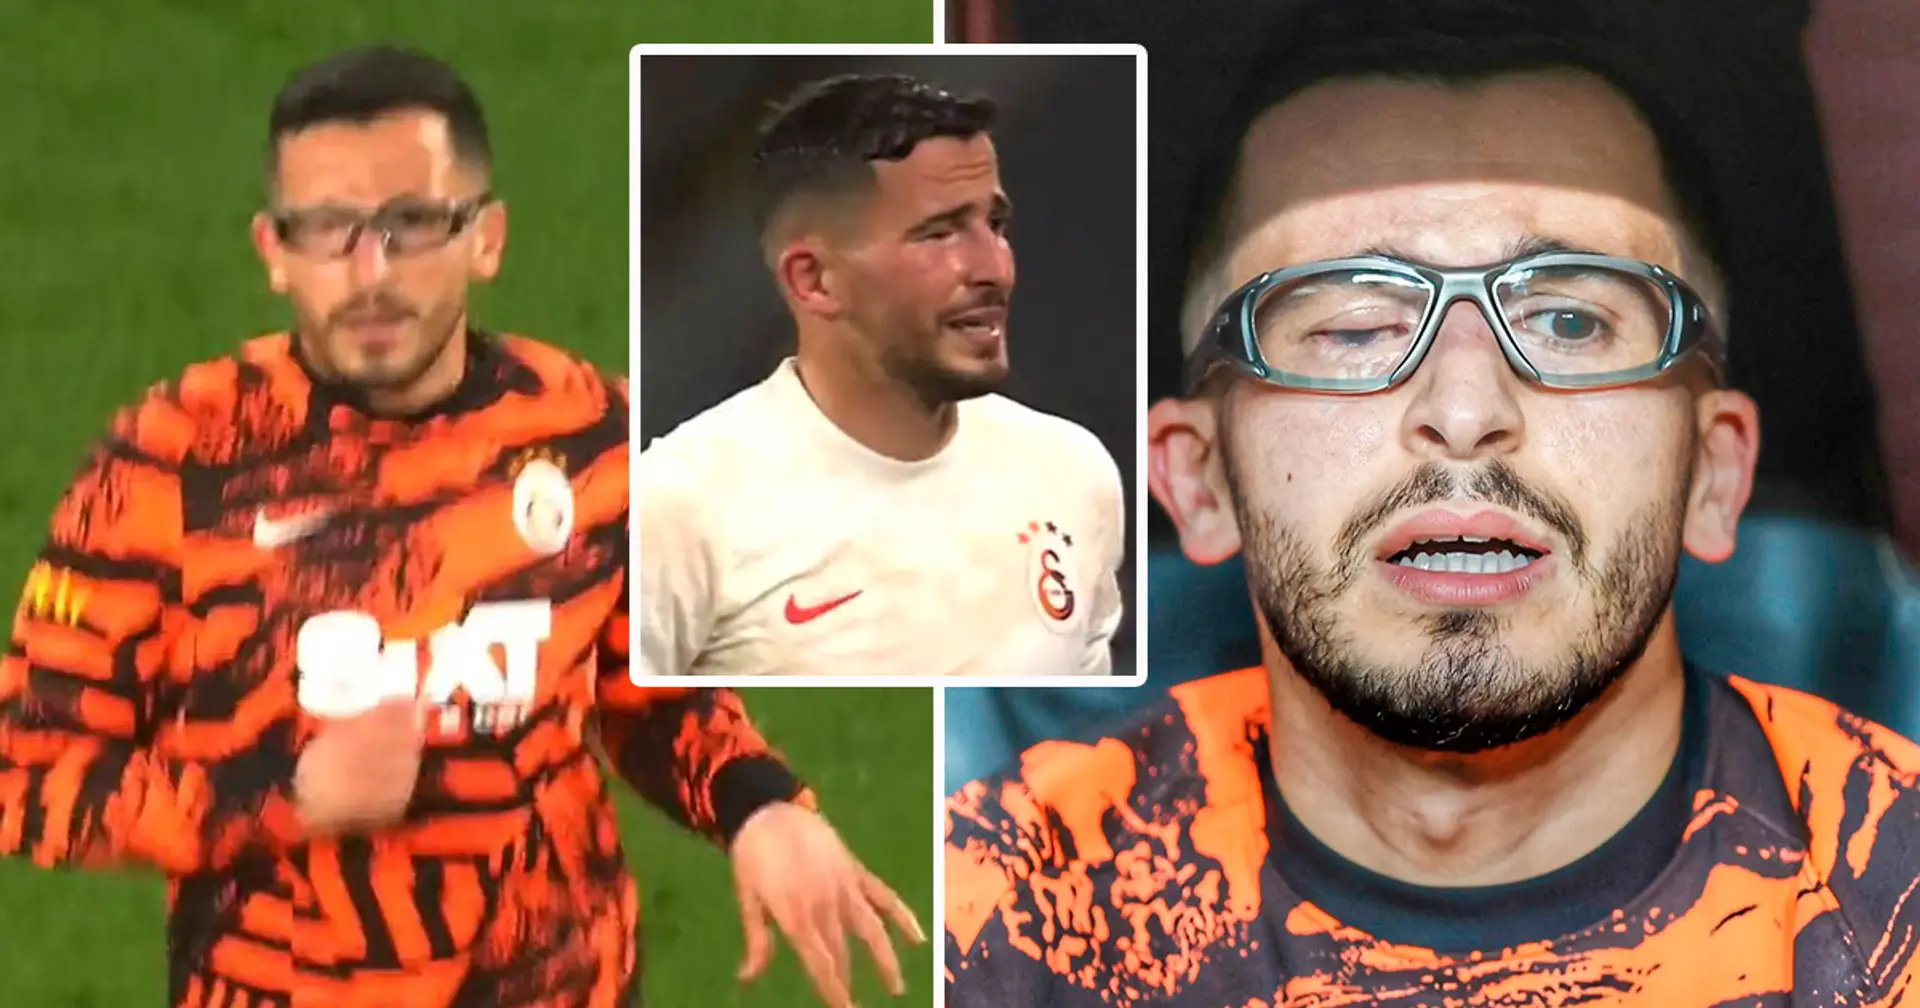 Former Man City defender makes miracle return to football after fireworks exploded in his face and left him clinically blind